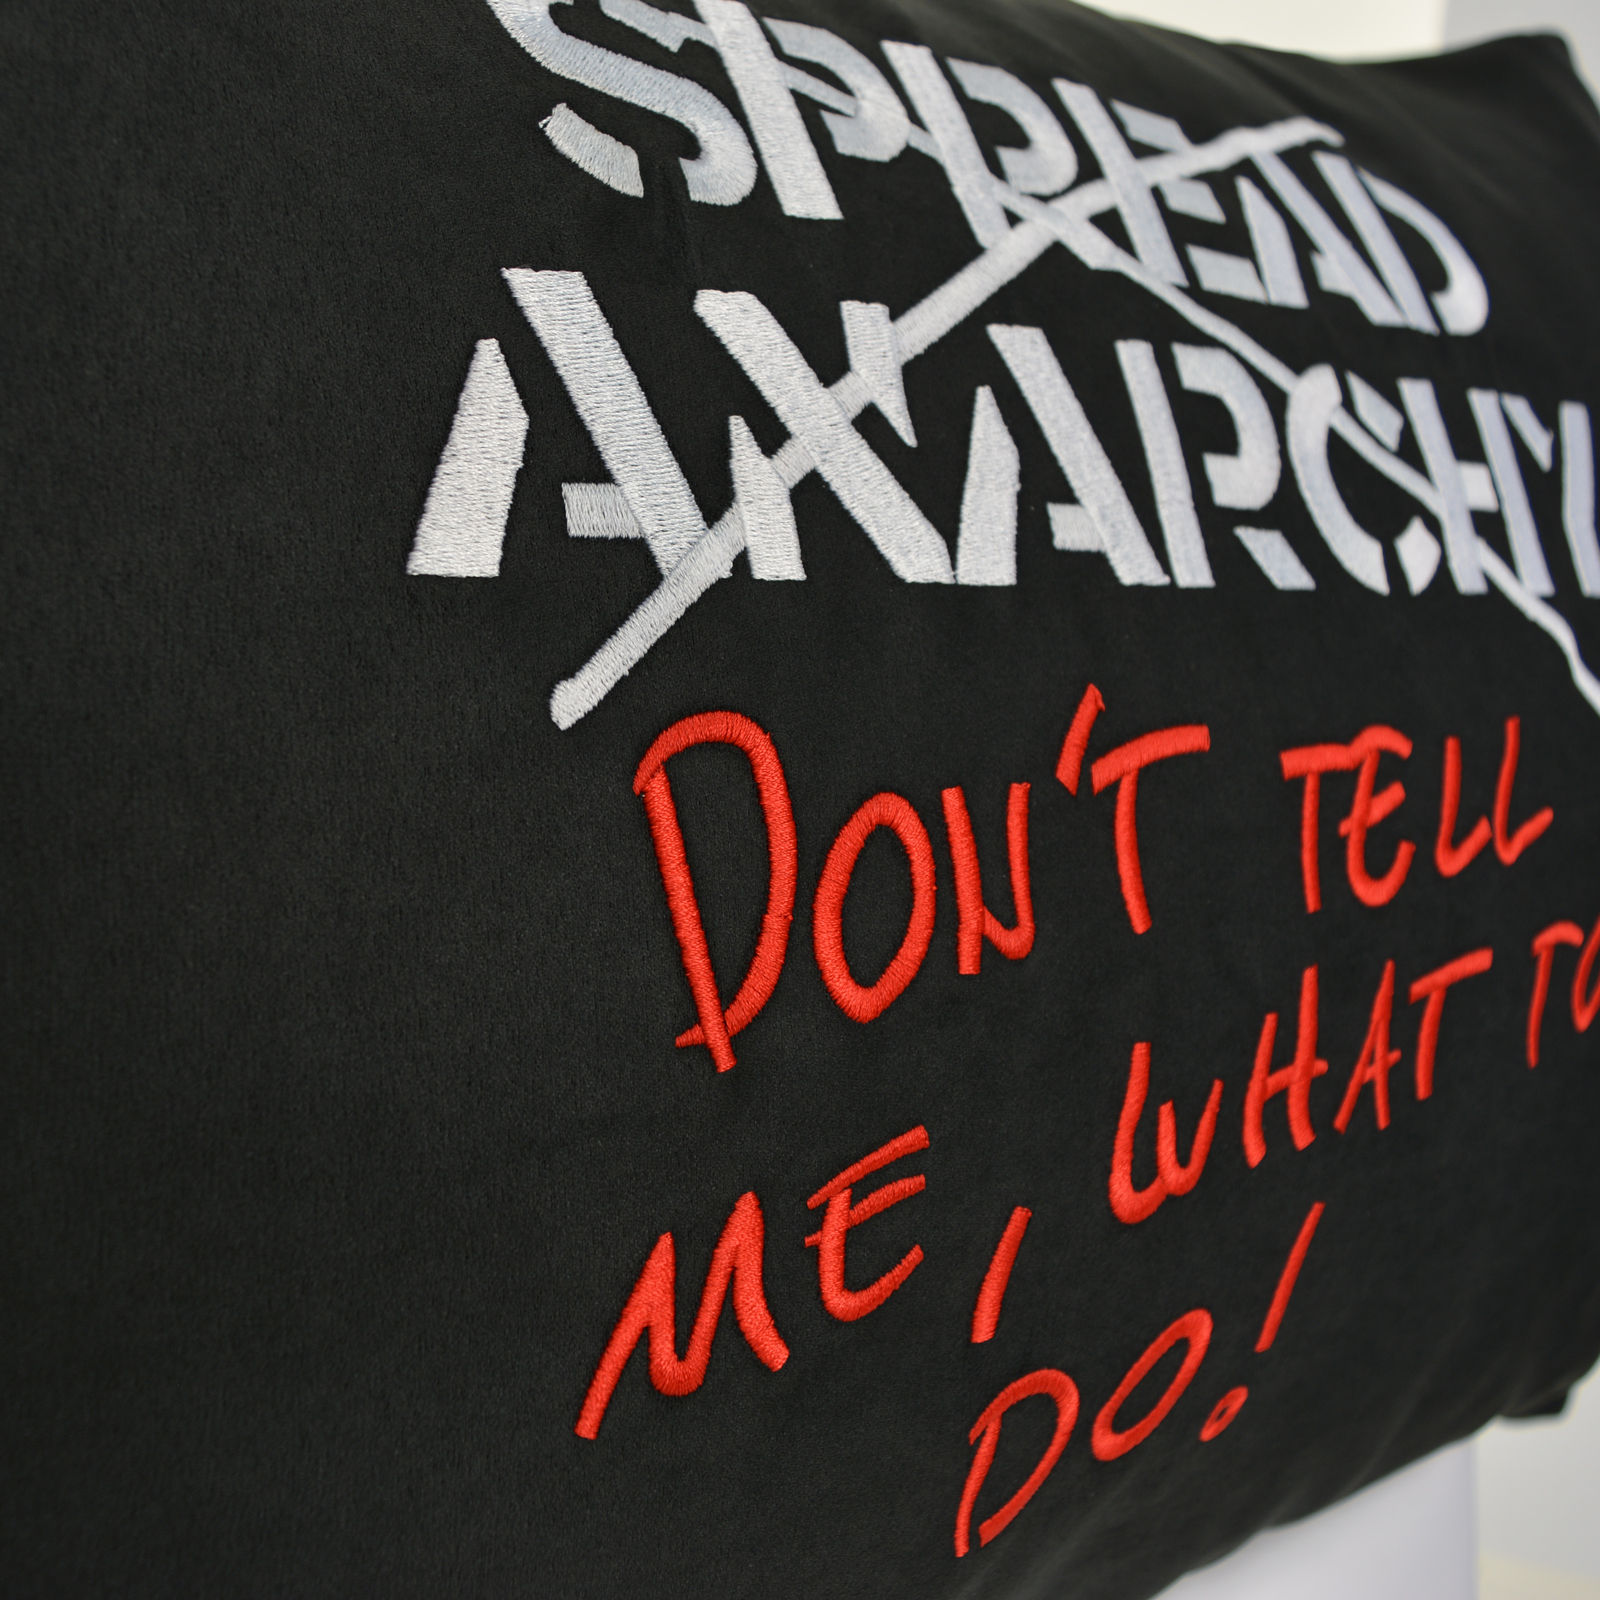 Spread anarchy - Don't tell me what to do! - Kissen